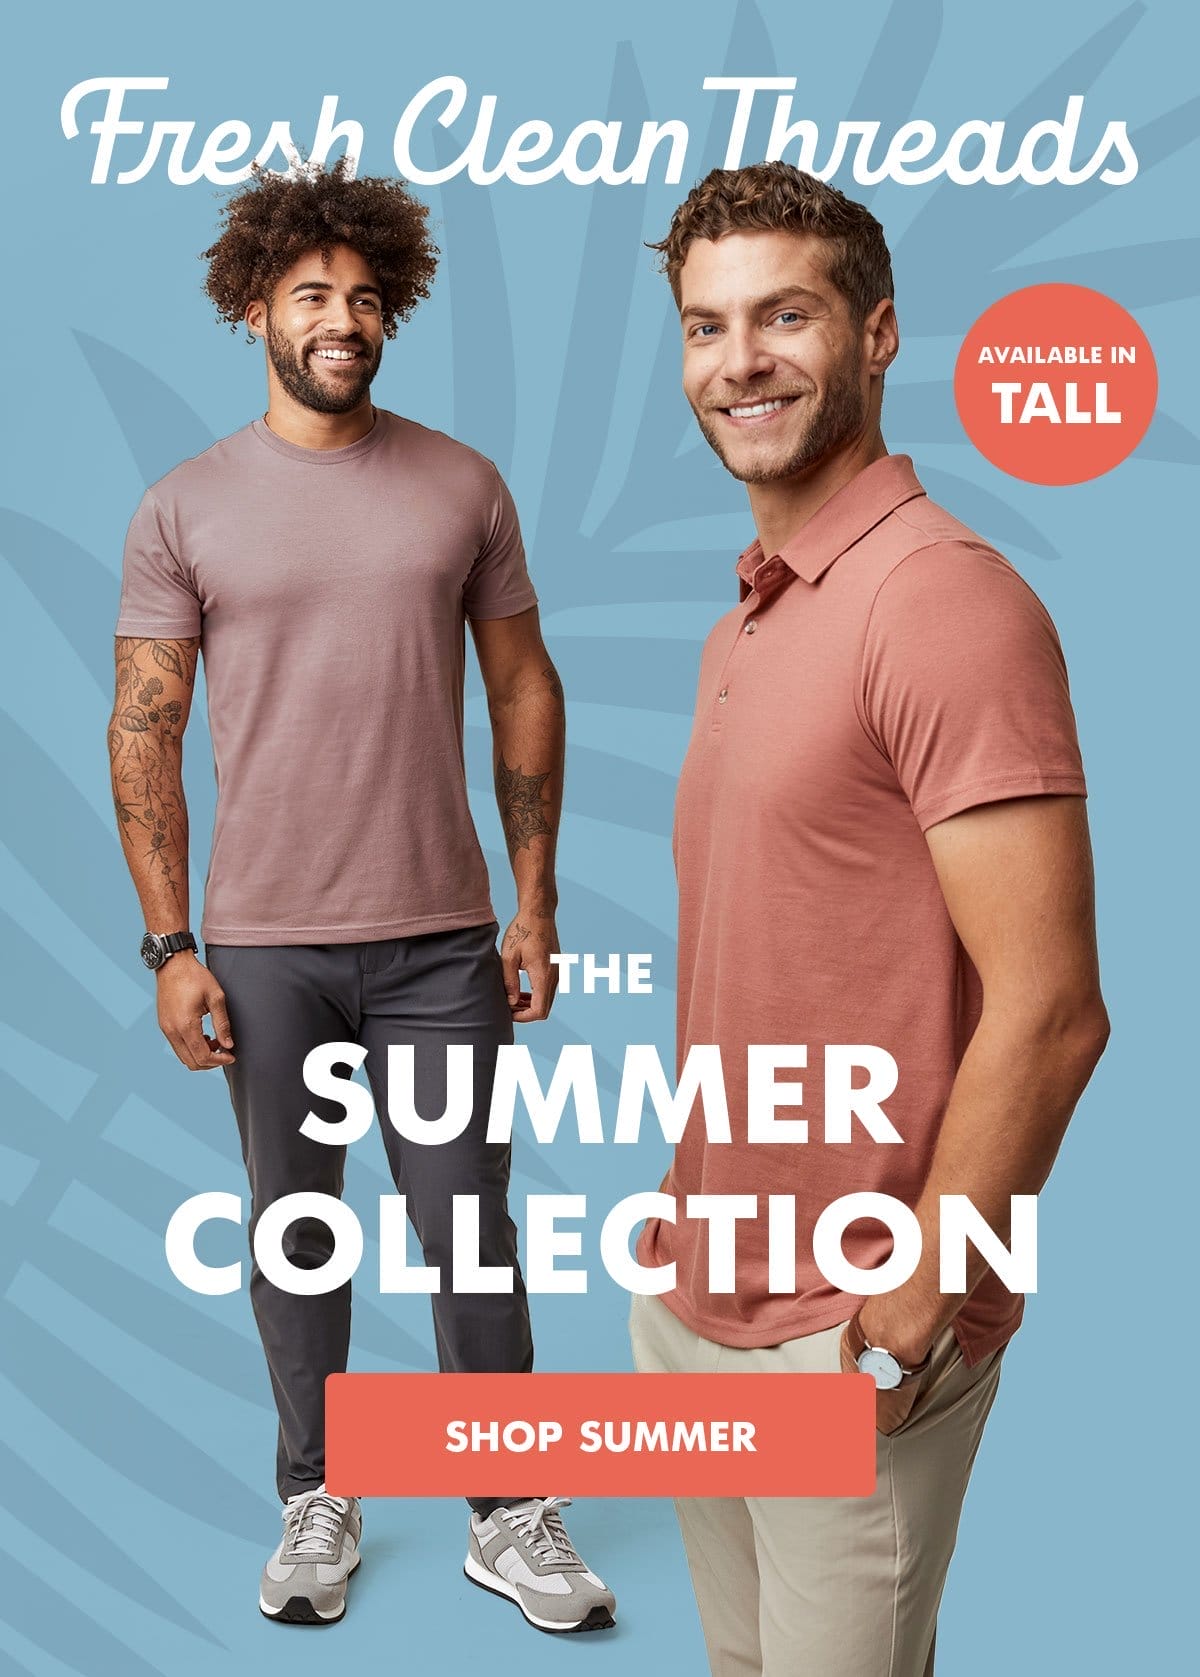 The summer collection